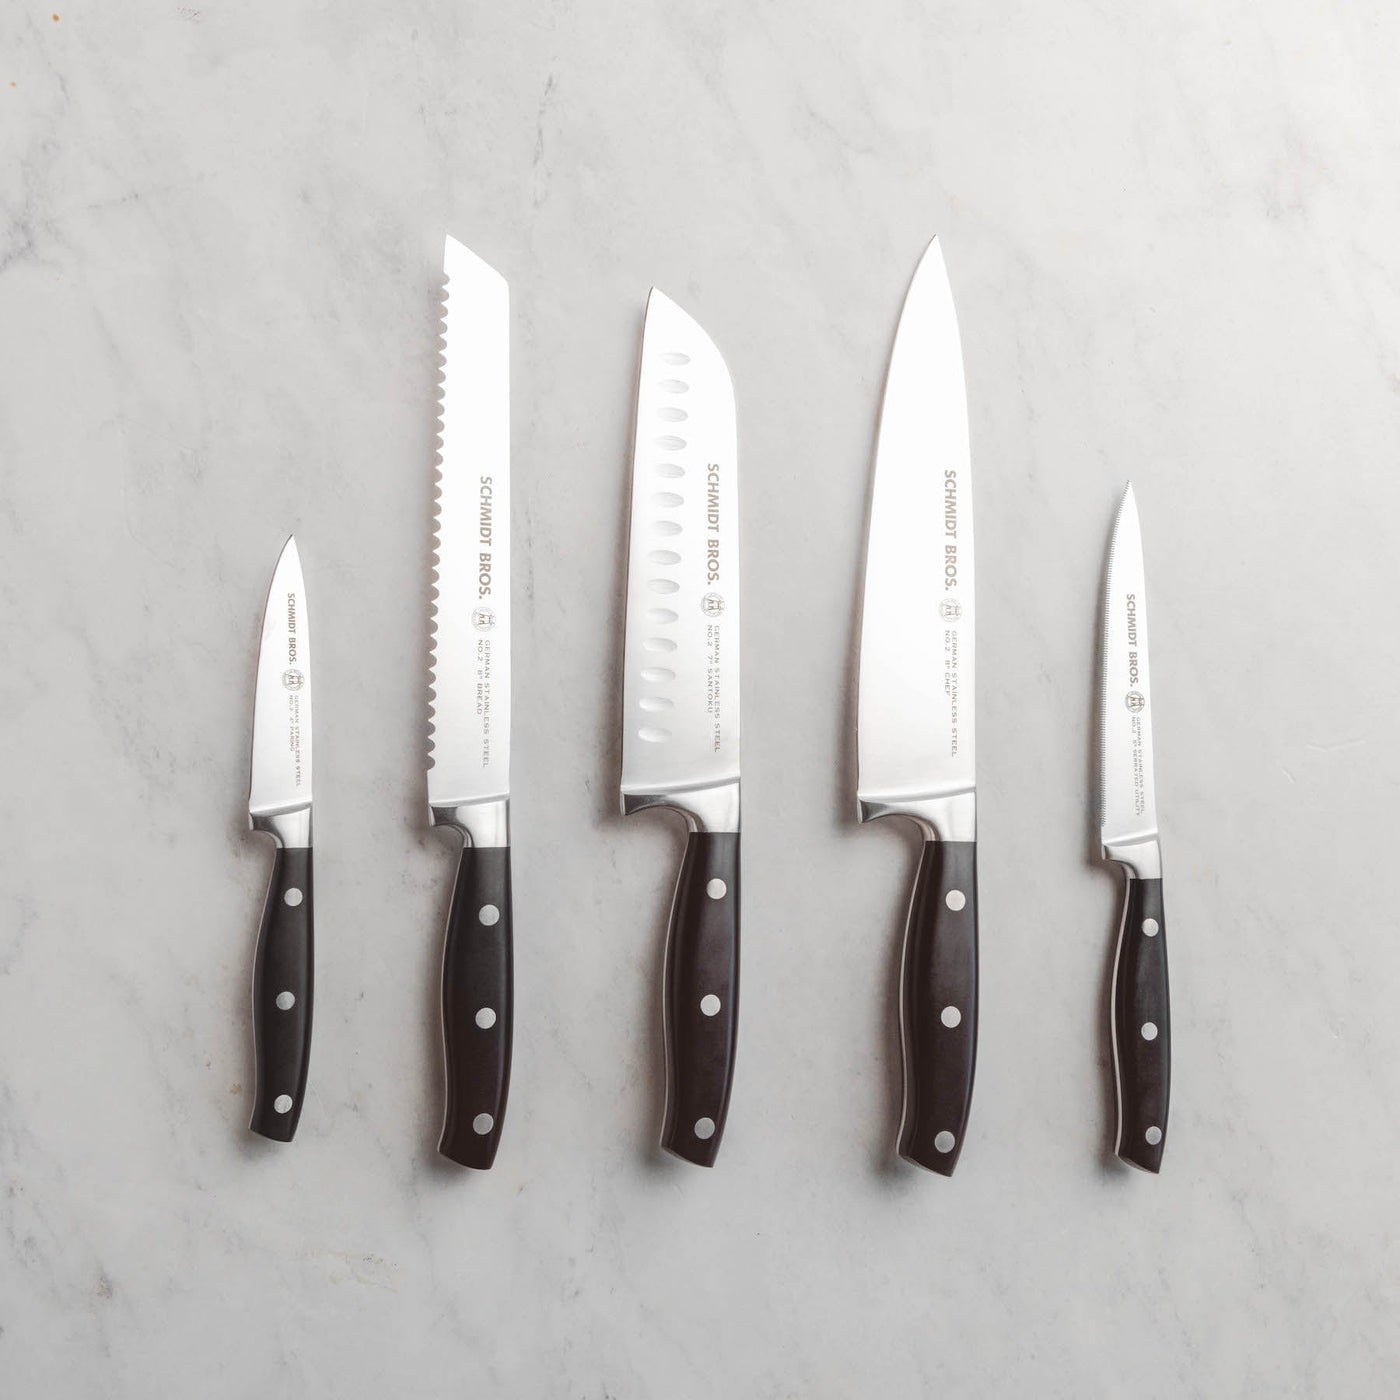 10-Piece Knife Set, Sheaths Included (Assorted Colors) – Schmidt Bros.